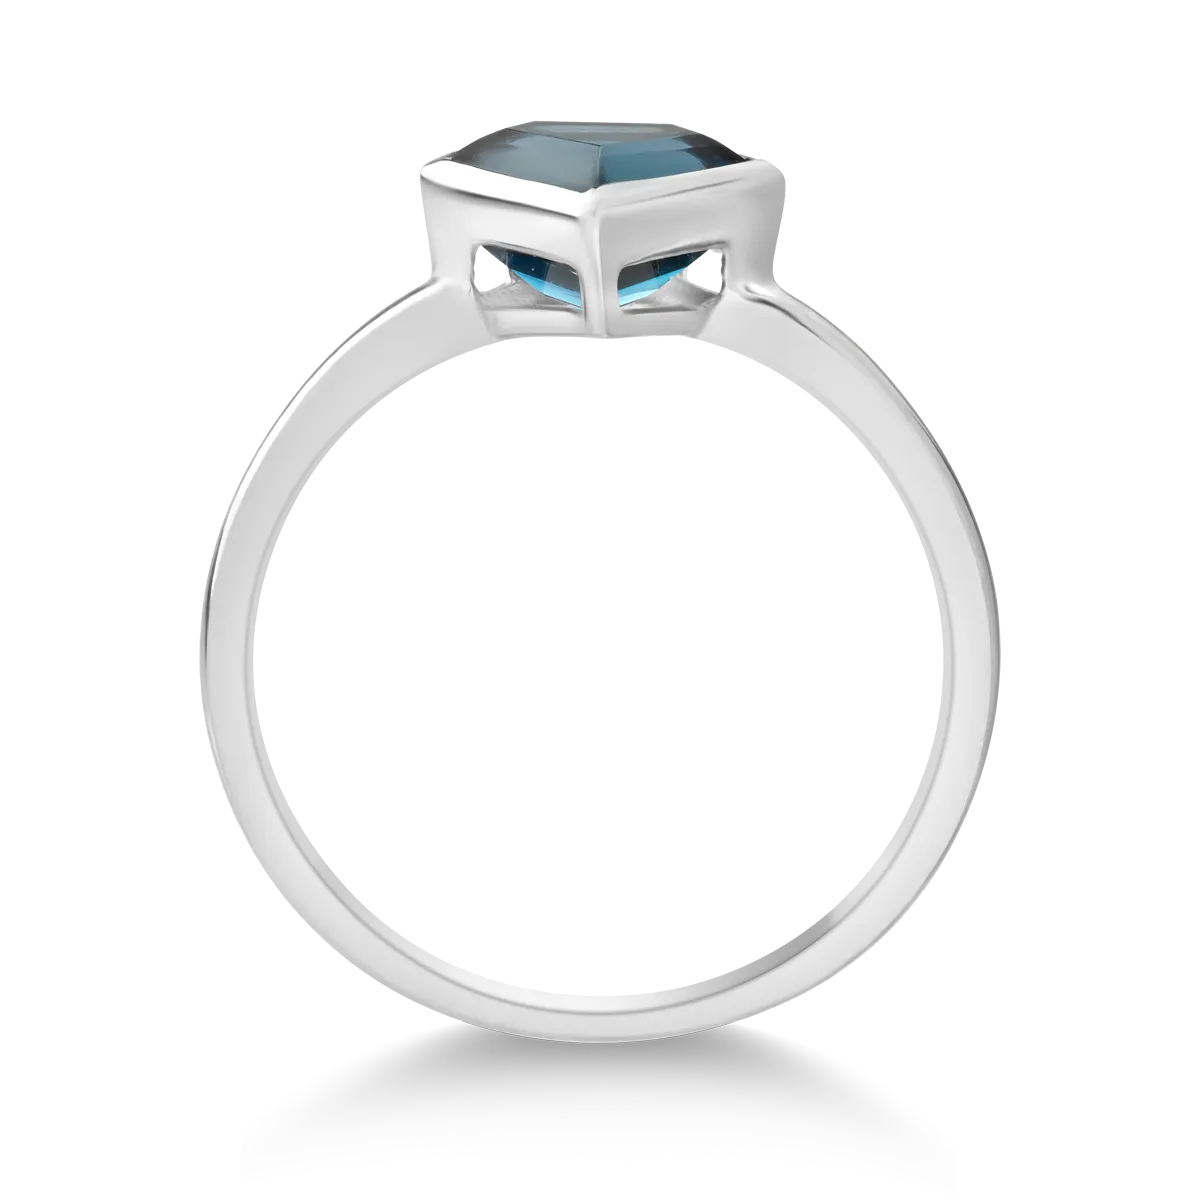 18K white gold ring with 1.6ct london blue topaz